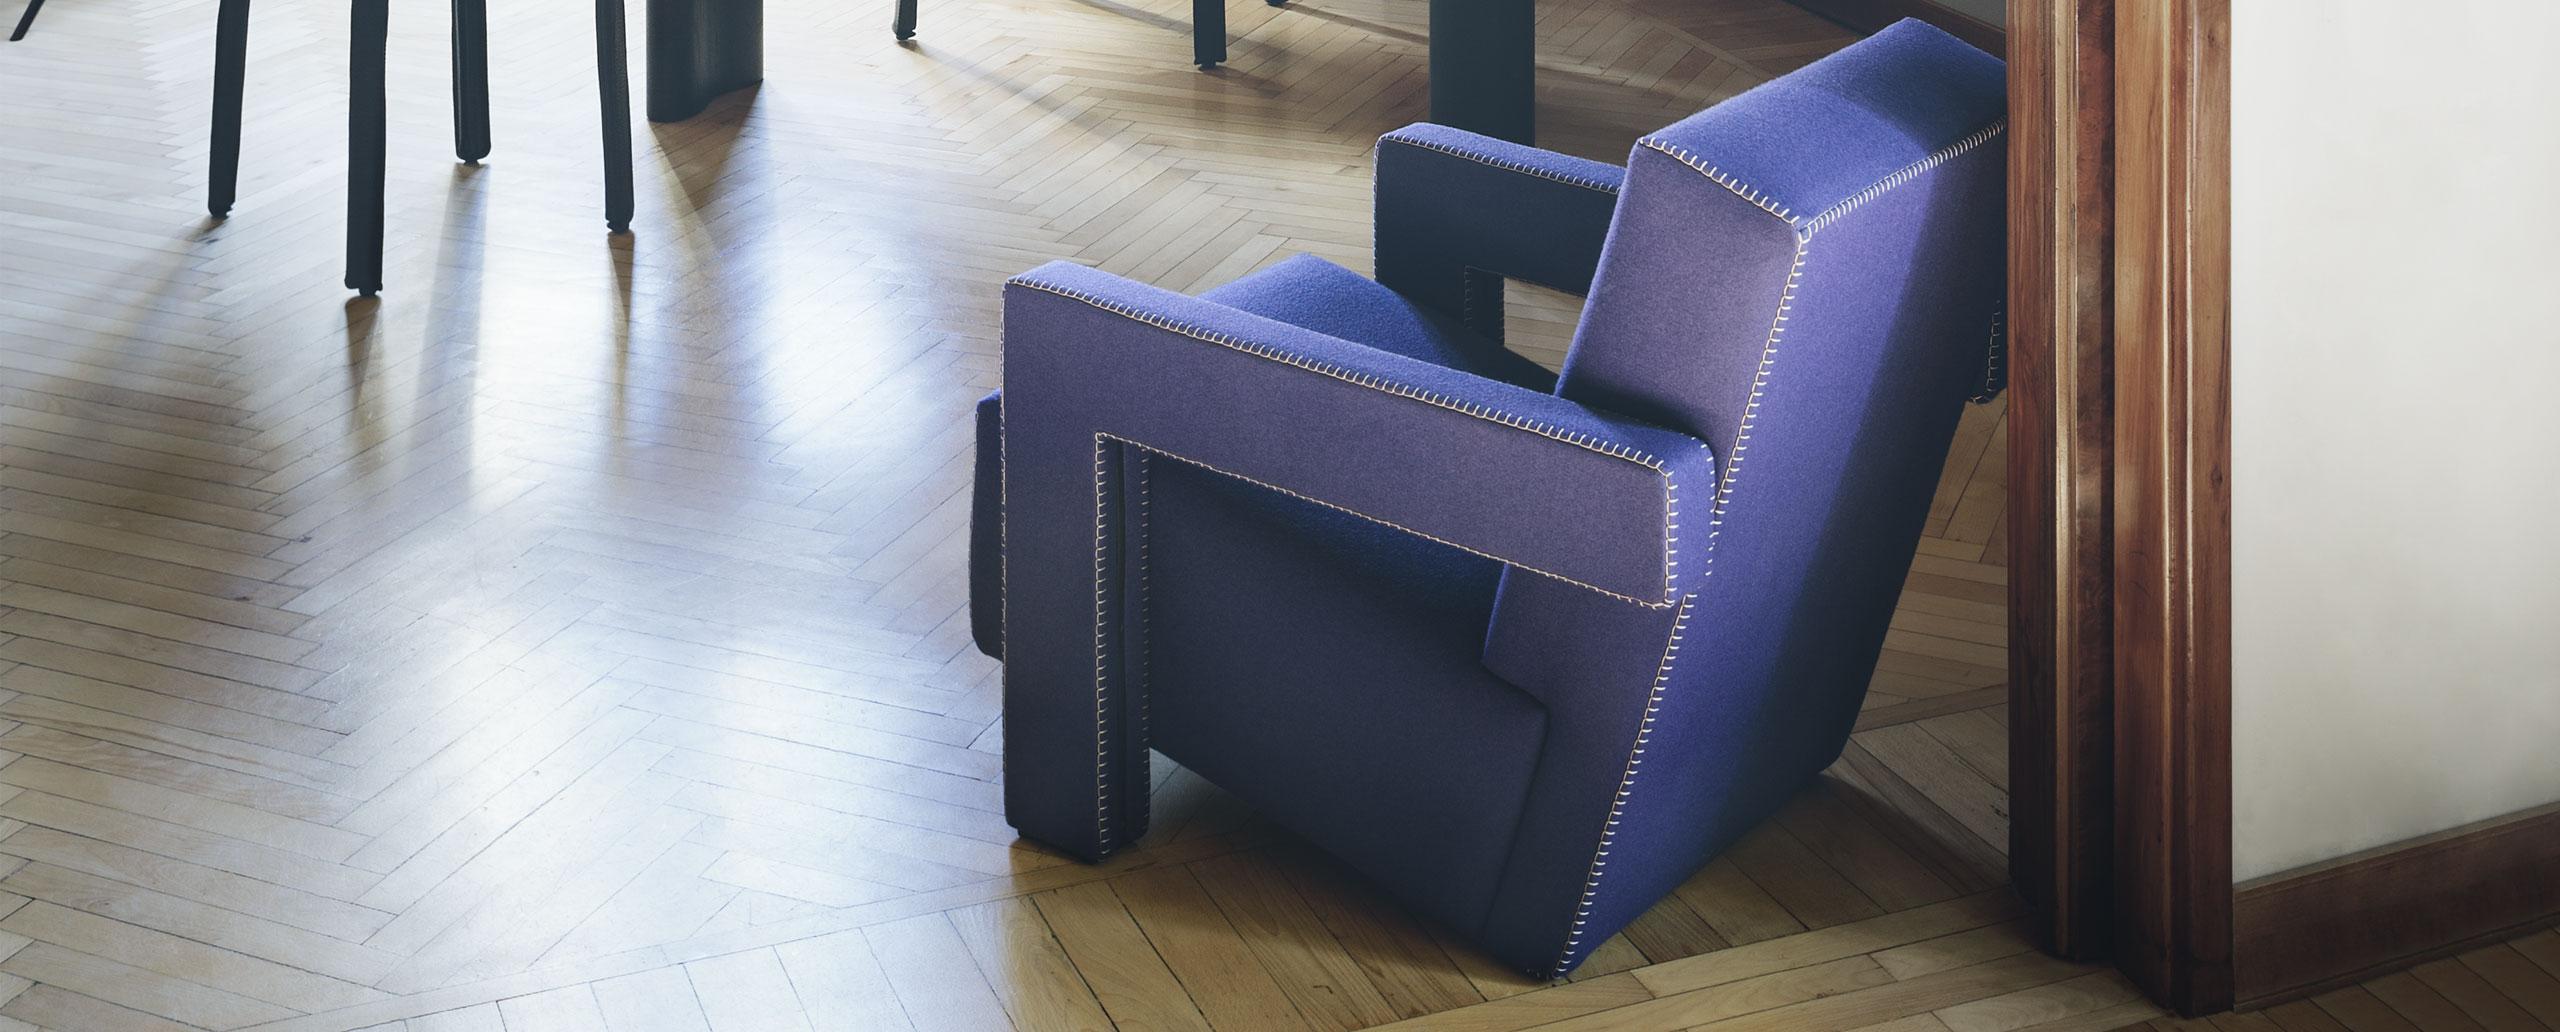 Contemporary Gerrit Thomas Rietveld Utrech Armchair by Cassina For Sale